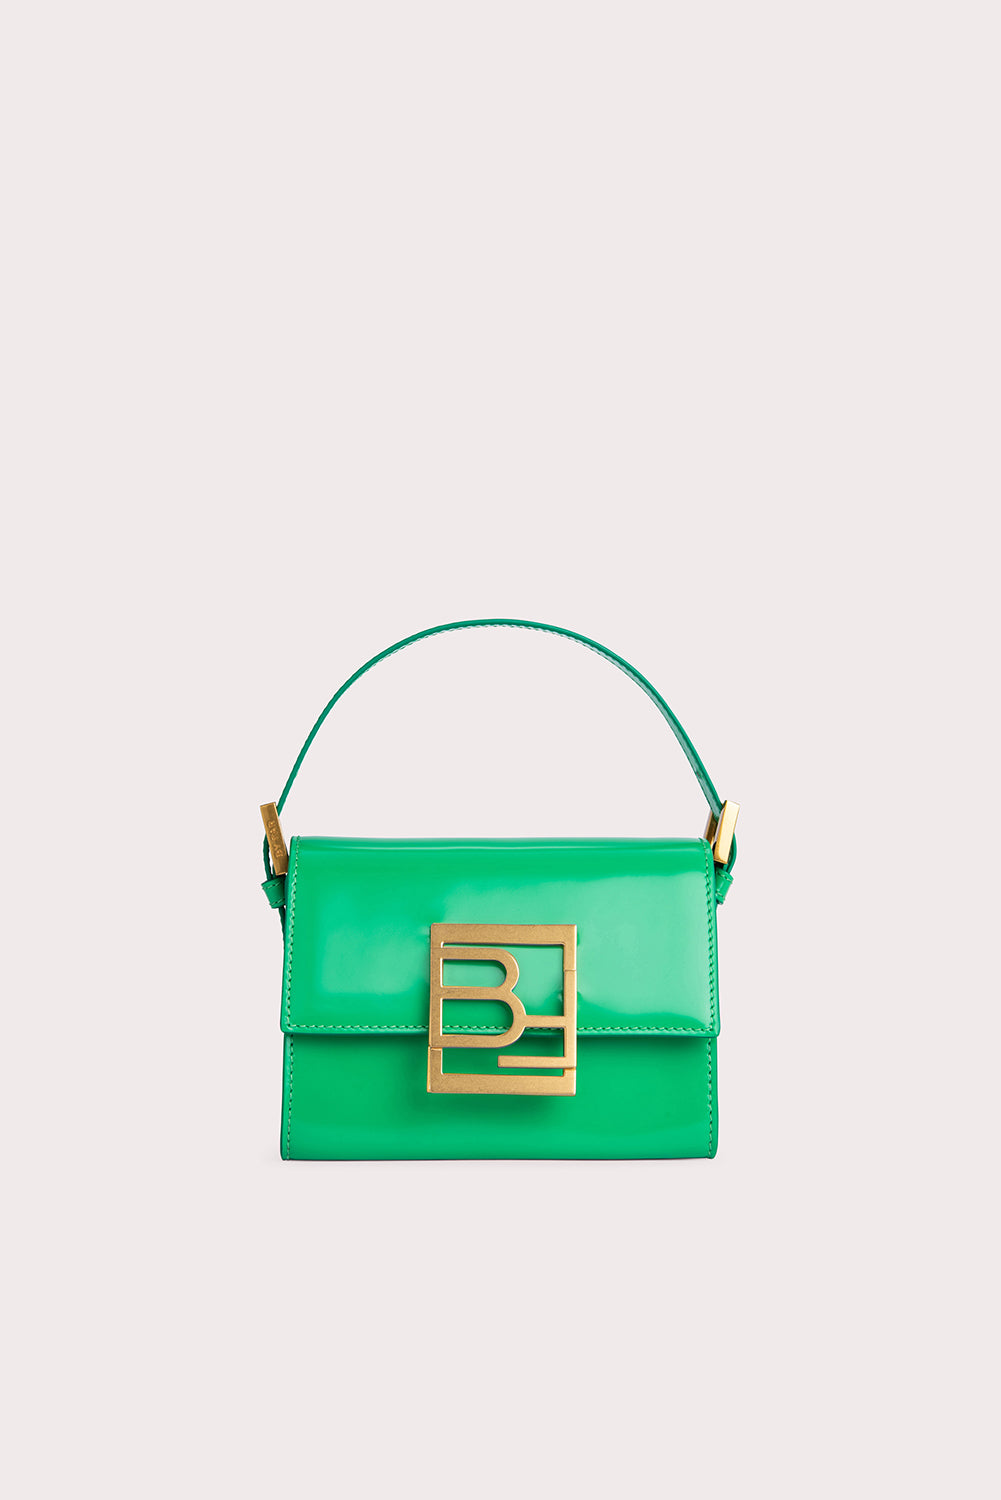 Baguette Phone Pouch - Green patent leather pouch